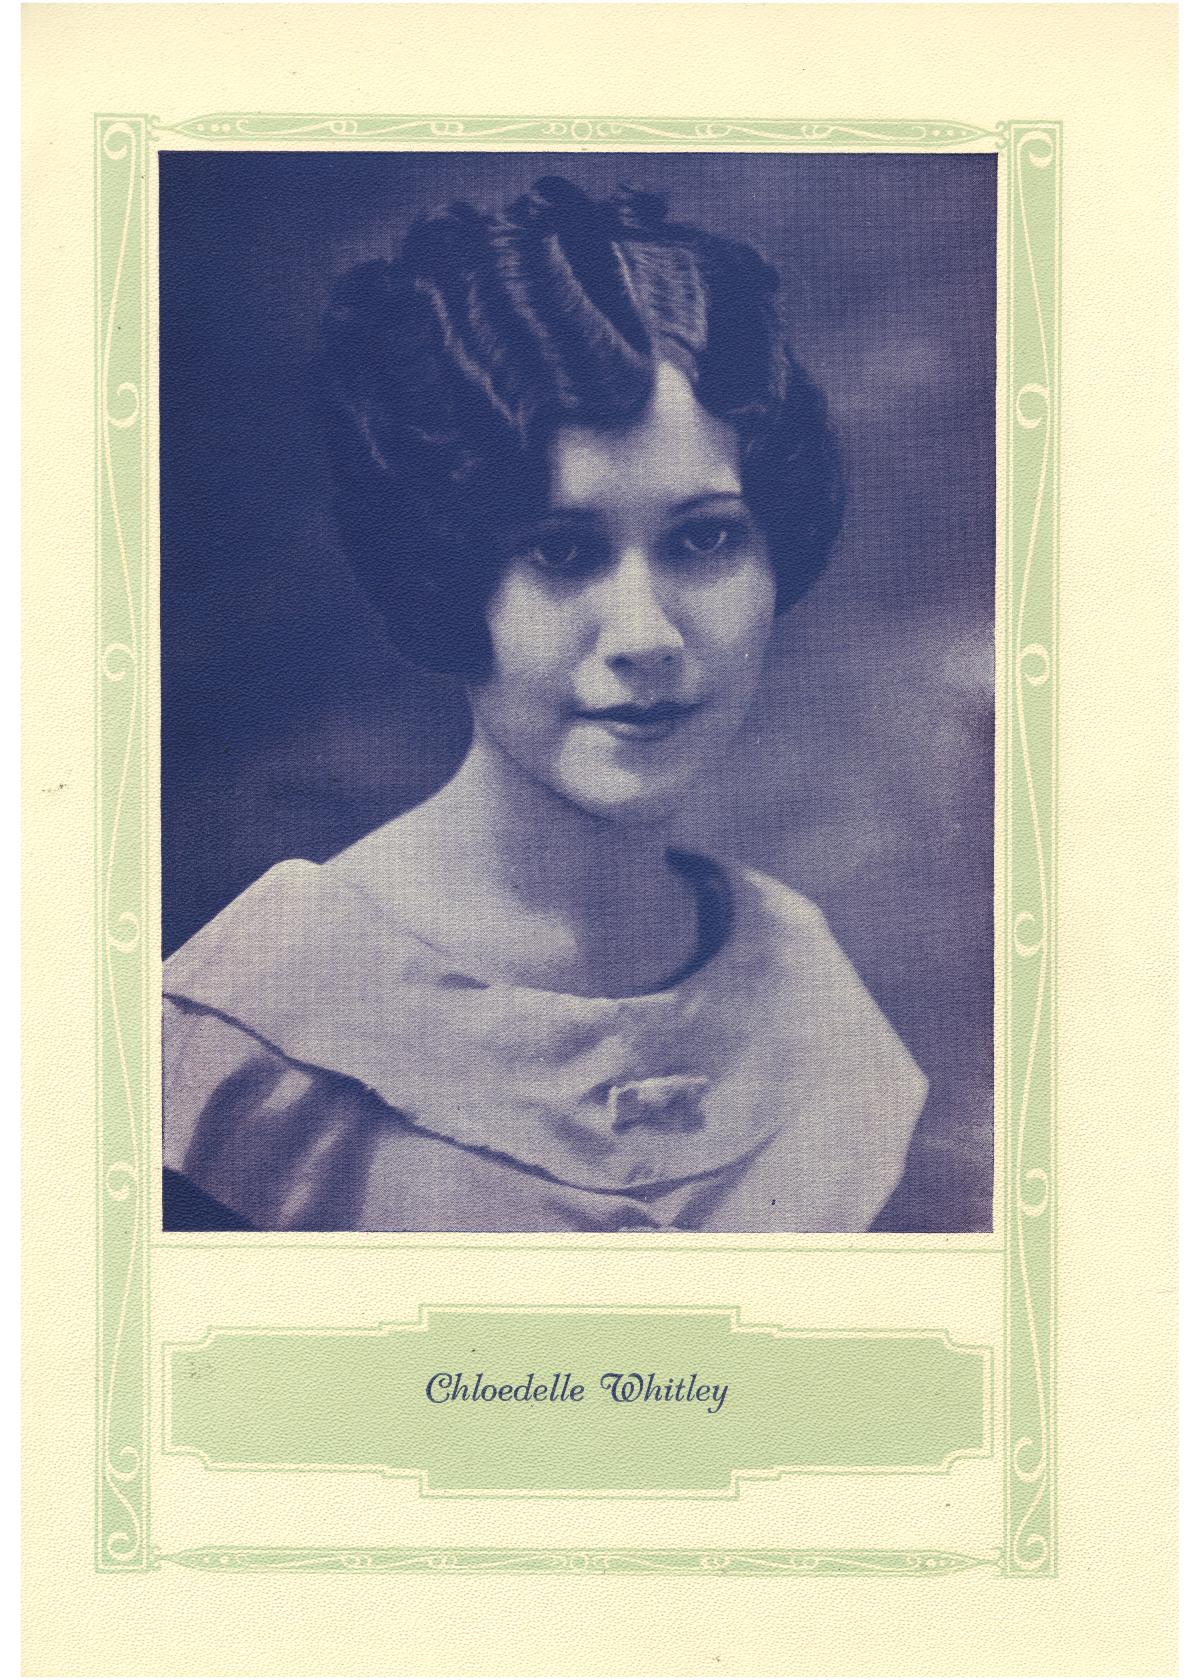 Prickly Pear, Yearbook of Abilene Christian College, 1927
                                                
                                                    172
                                                